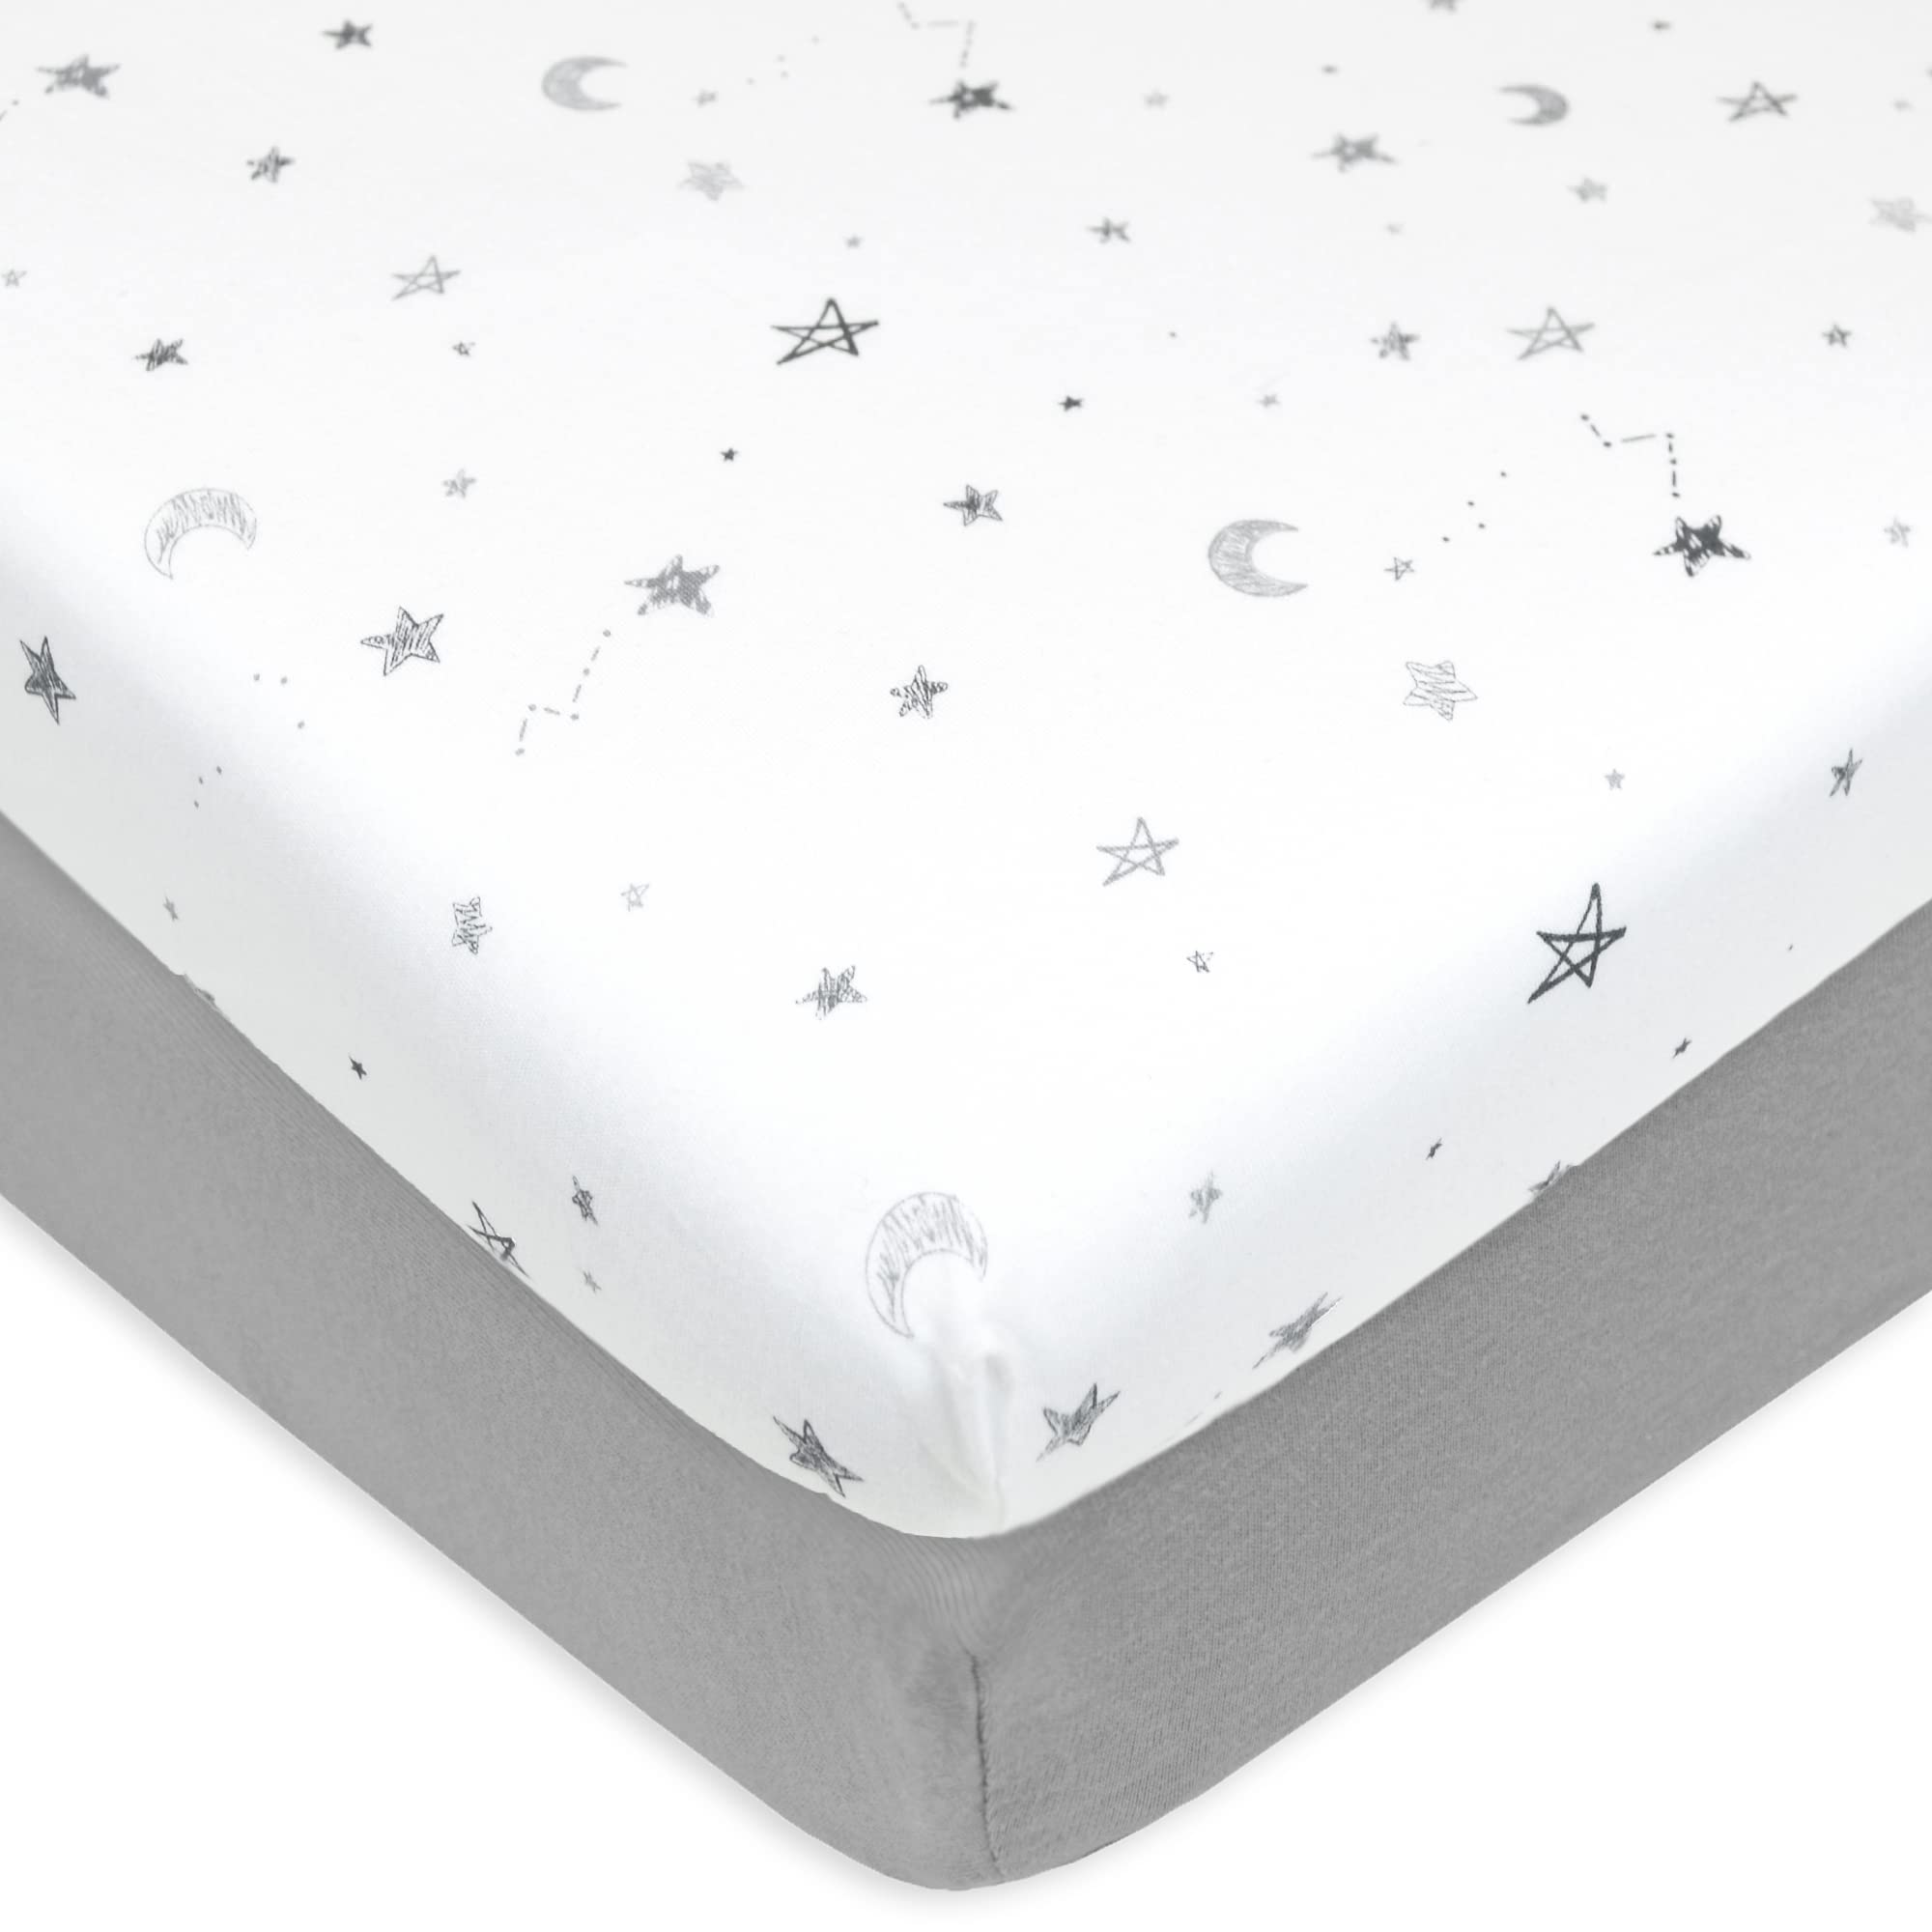 American Baby Company 2 Pack Printed 100% Natural Cotton Jersey Knit Fitted Pack N Play Playard Sheet, Gray Star and Gray, Soft Breathable, for Boys and Girls